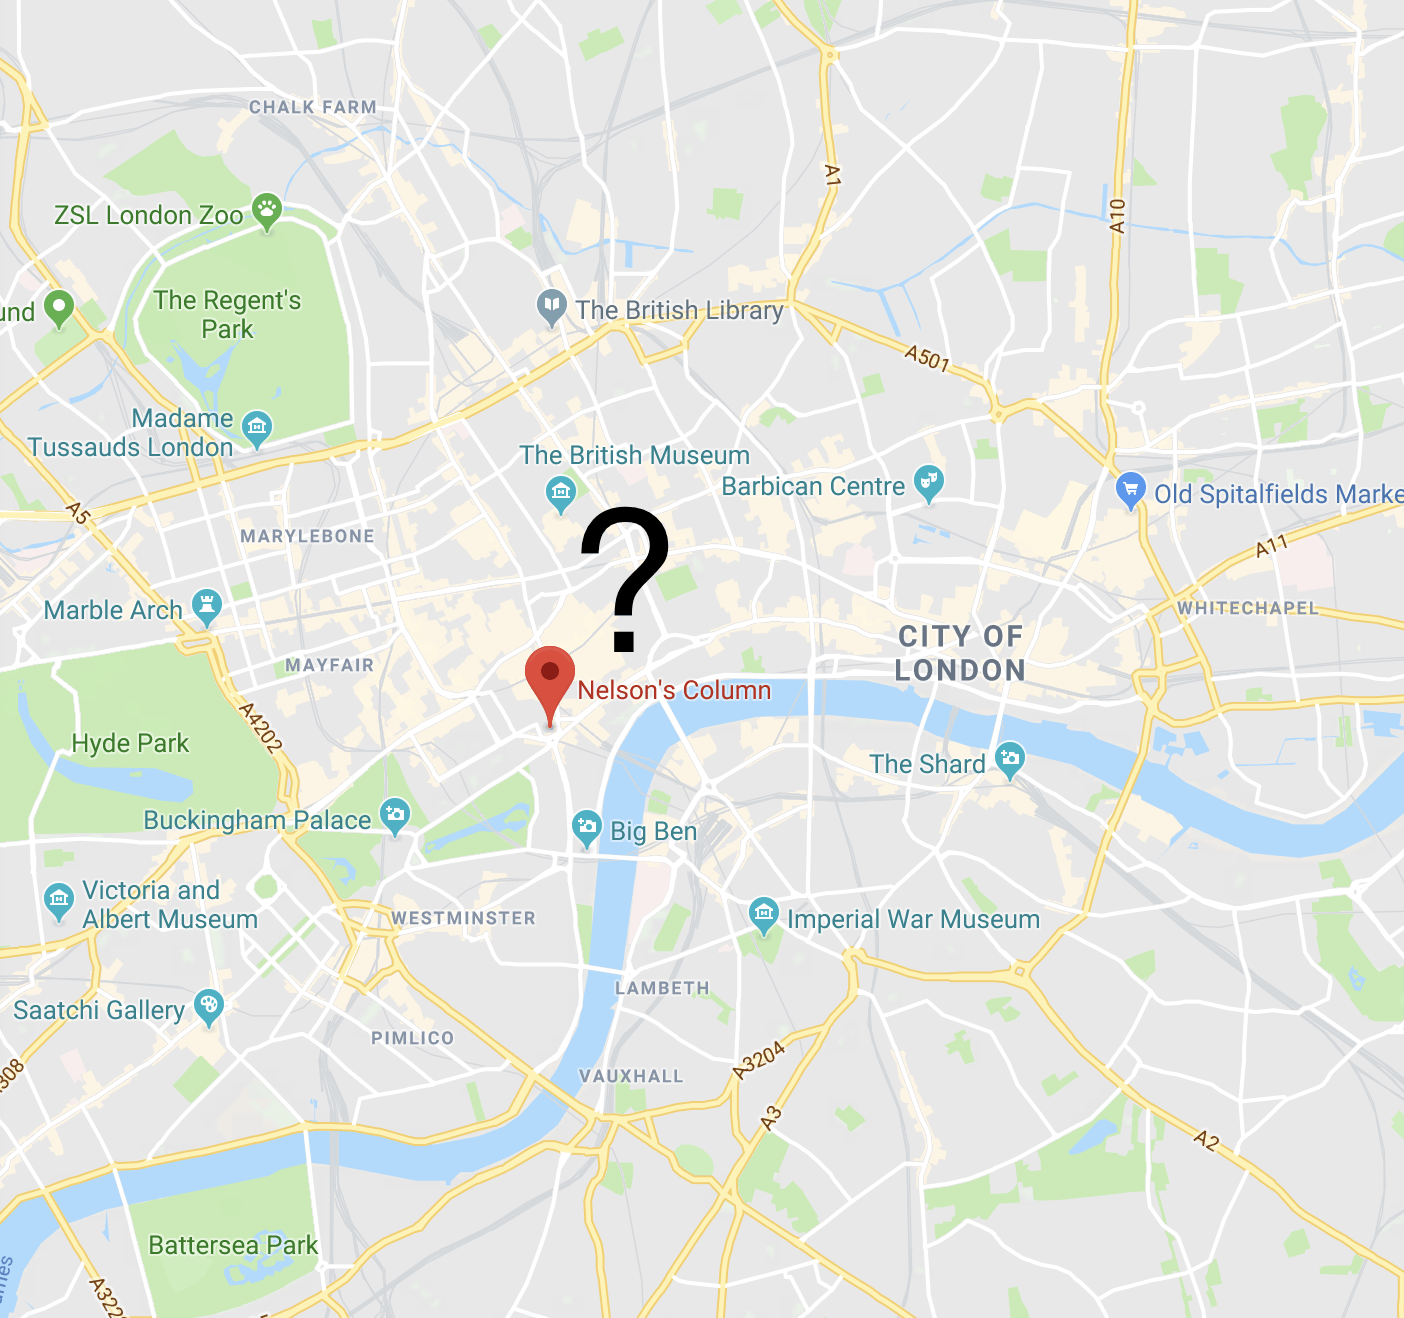 A map of London.